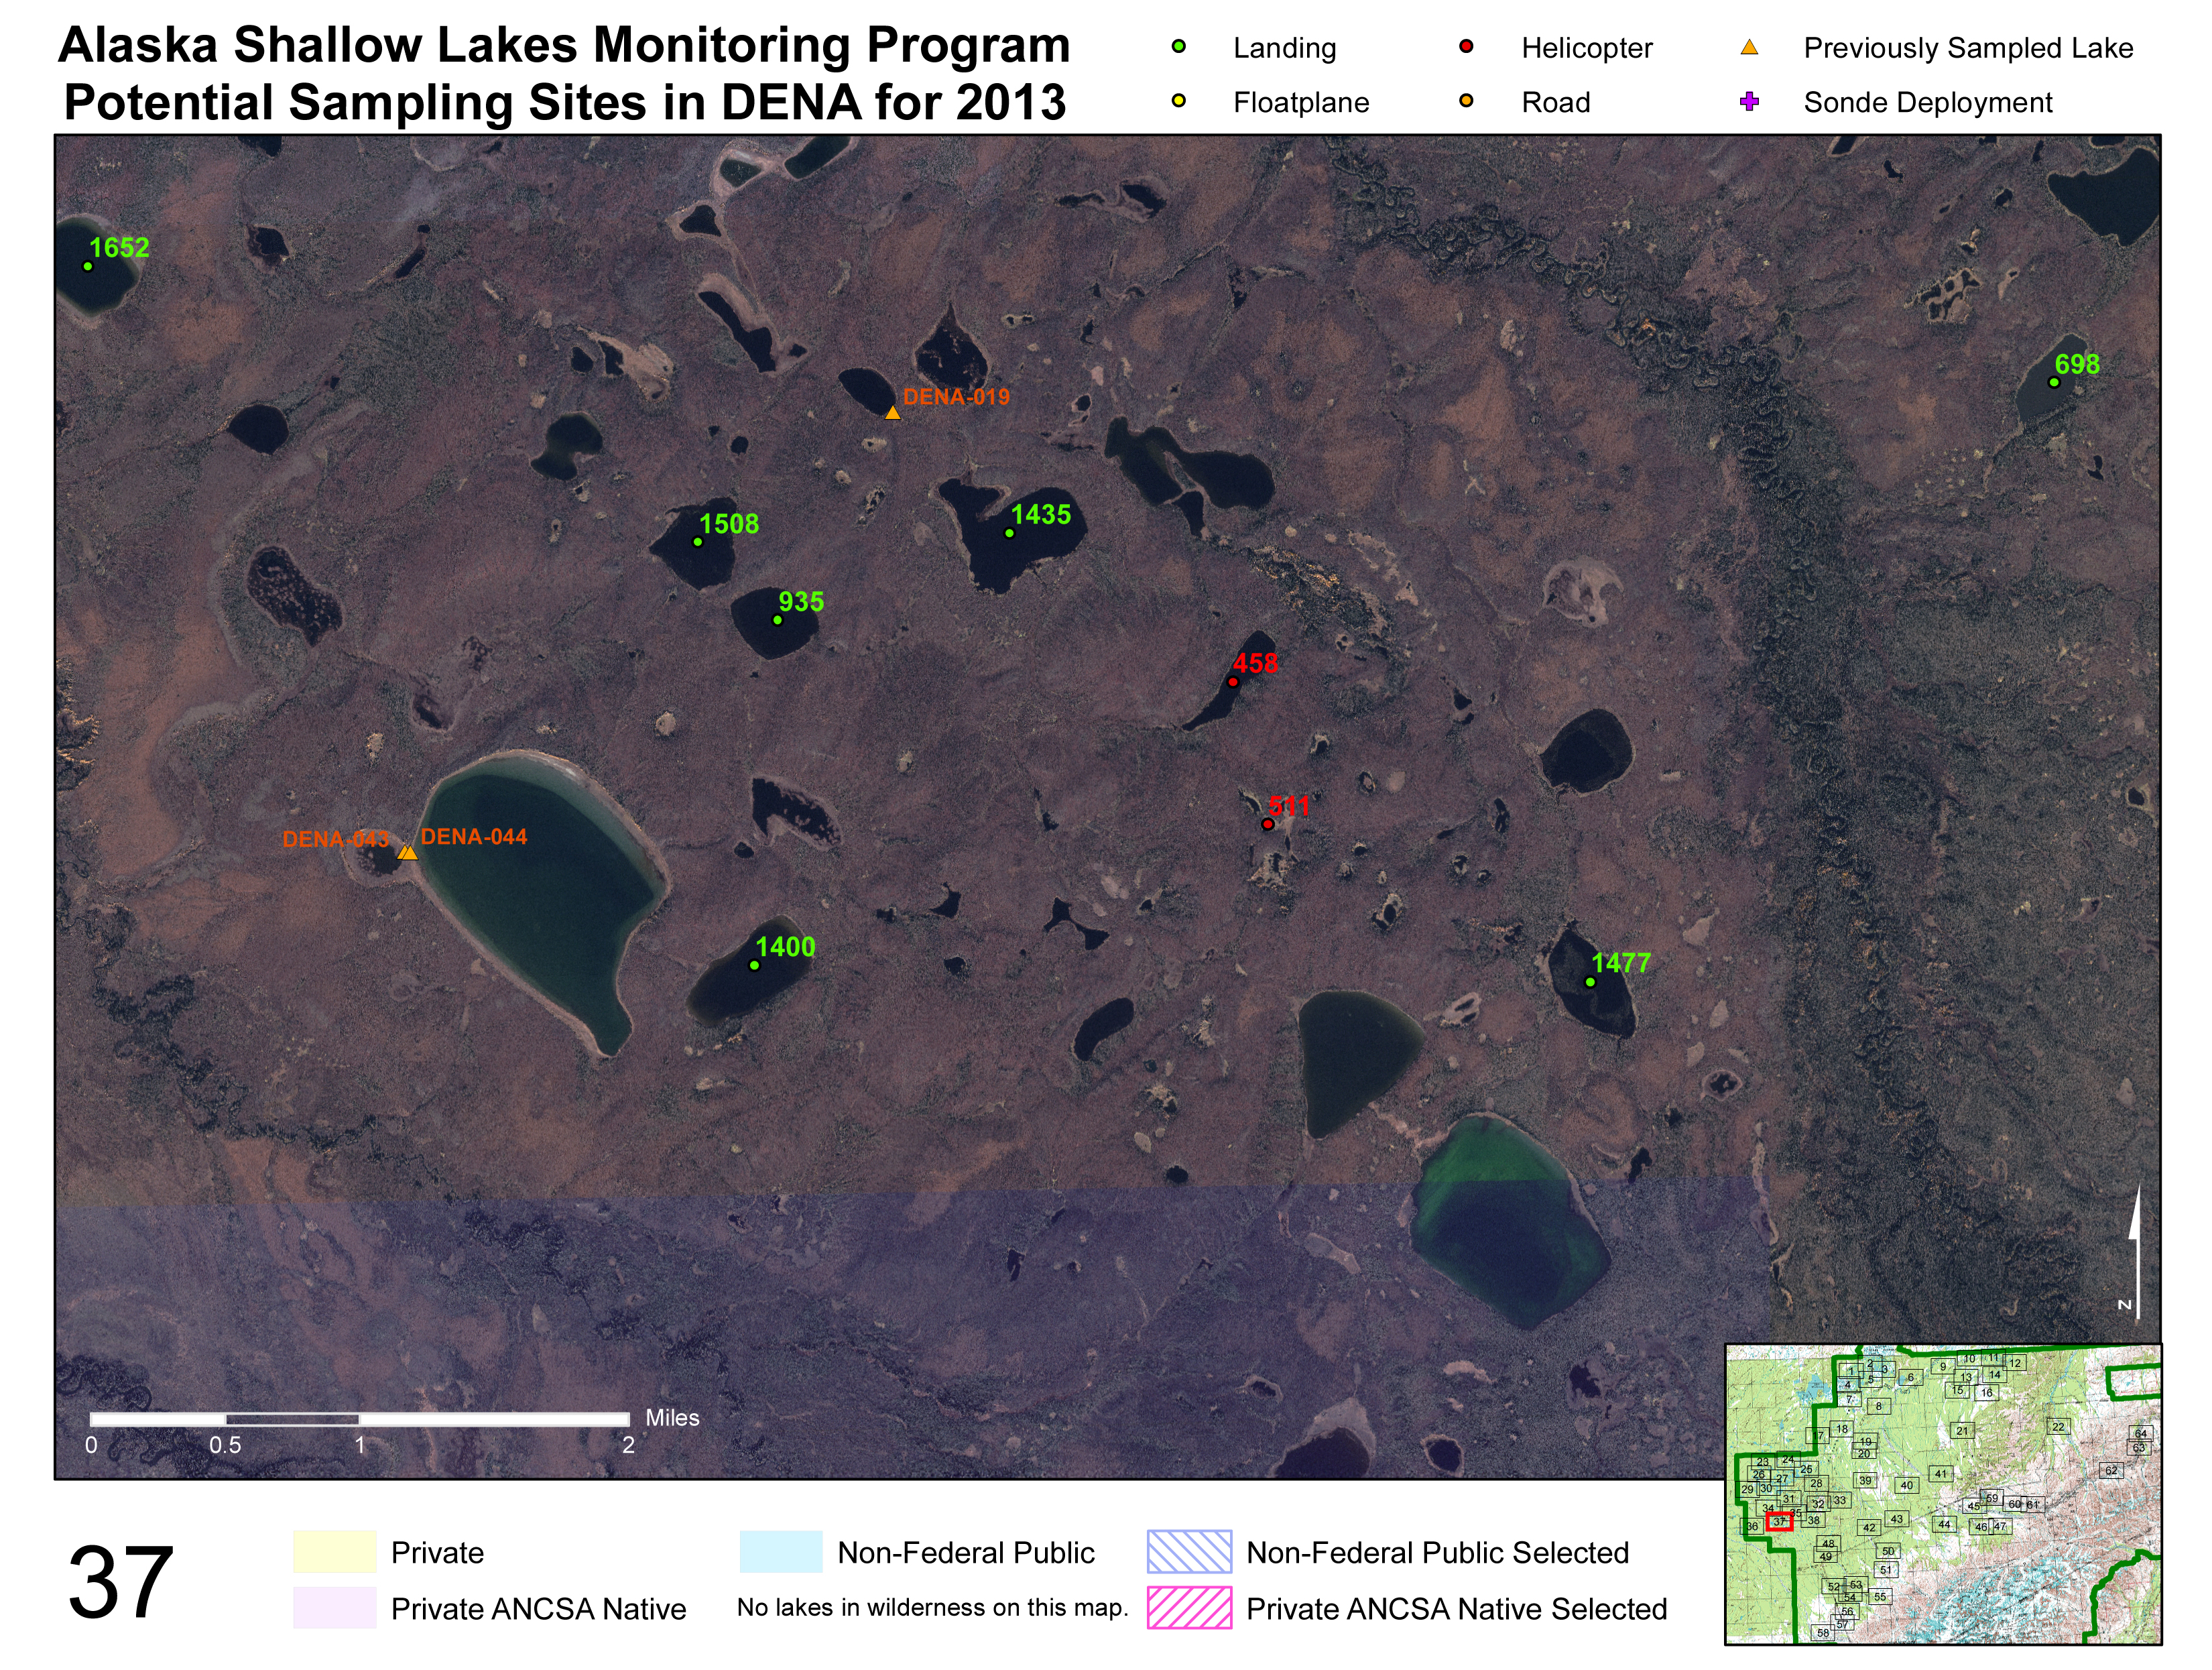 An imagery map produced for use in Denali National Park and Preserve during sampling efforts in 2013. Base imagery is IKONOS satellite imagery, the lakes selected for sampling are marked with their identification number and color-coded by access type, previously sampled lakes are marked, and land status layers are included. The map extent (Map 37 in this example) is indicated in red in the index map. 